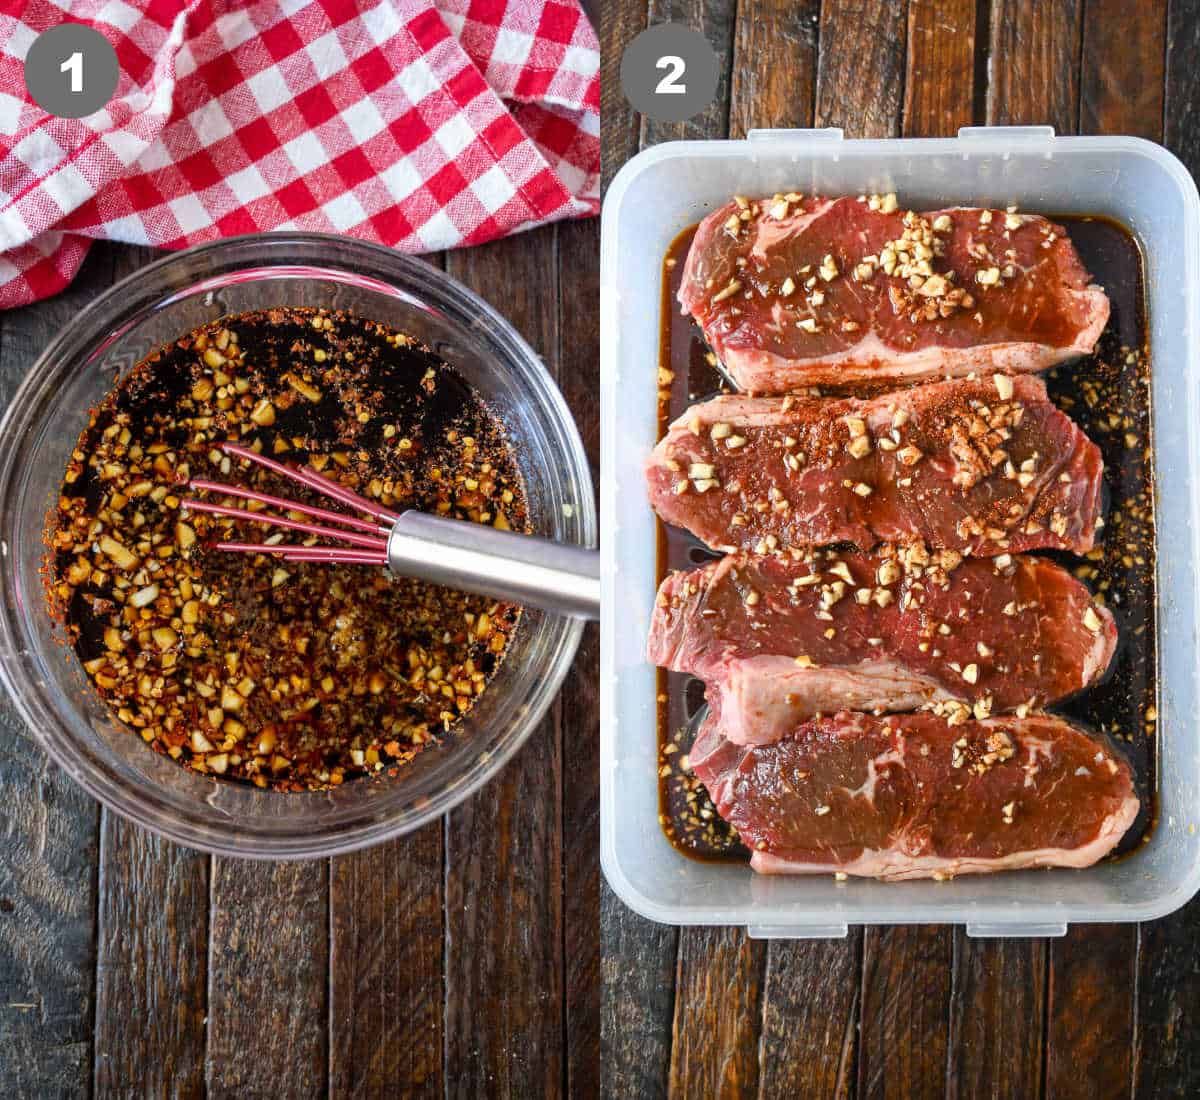 Marinade ingredients in a bowl and poured over raw steak.